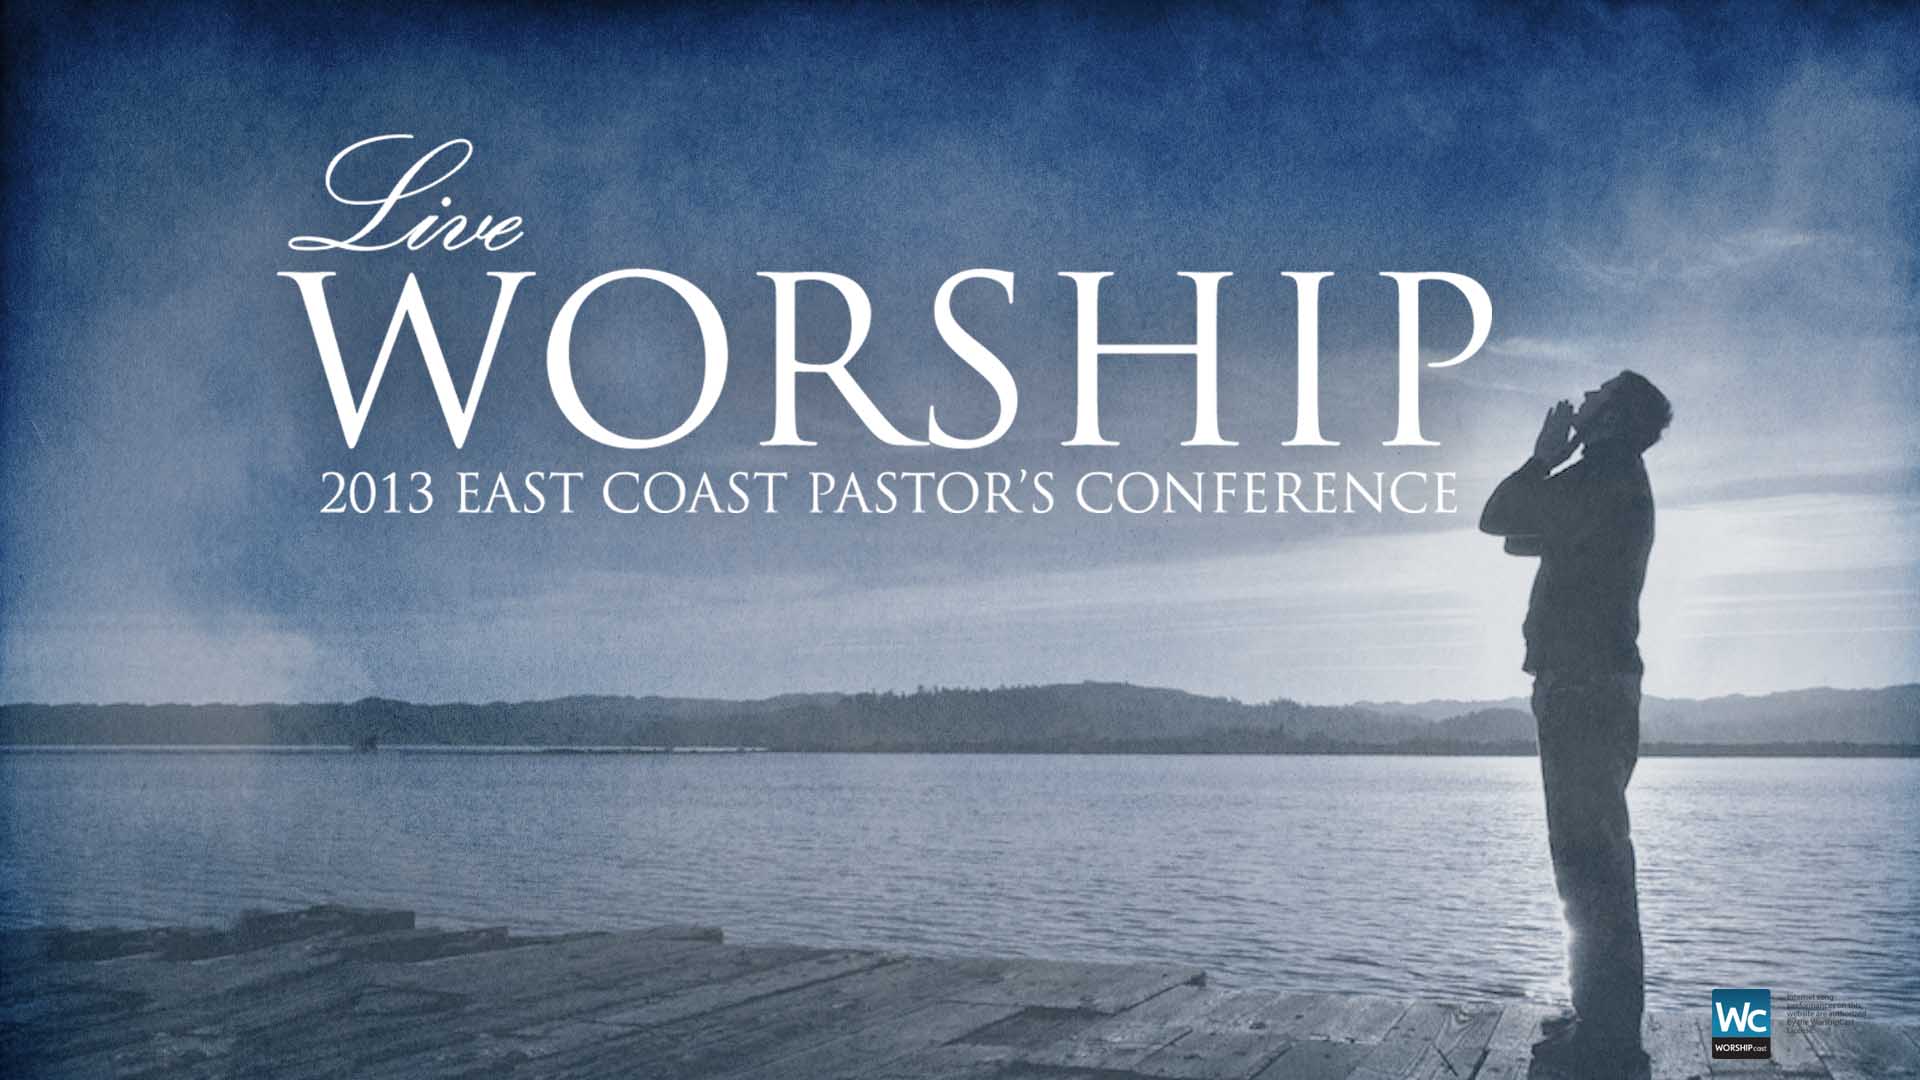 2013 East Coast Pastor's Conference Live Worship